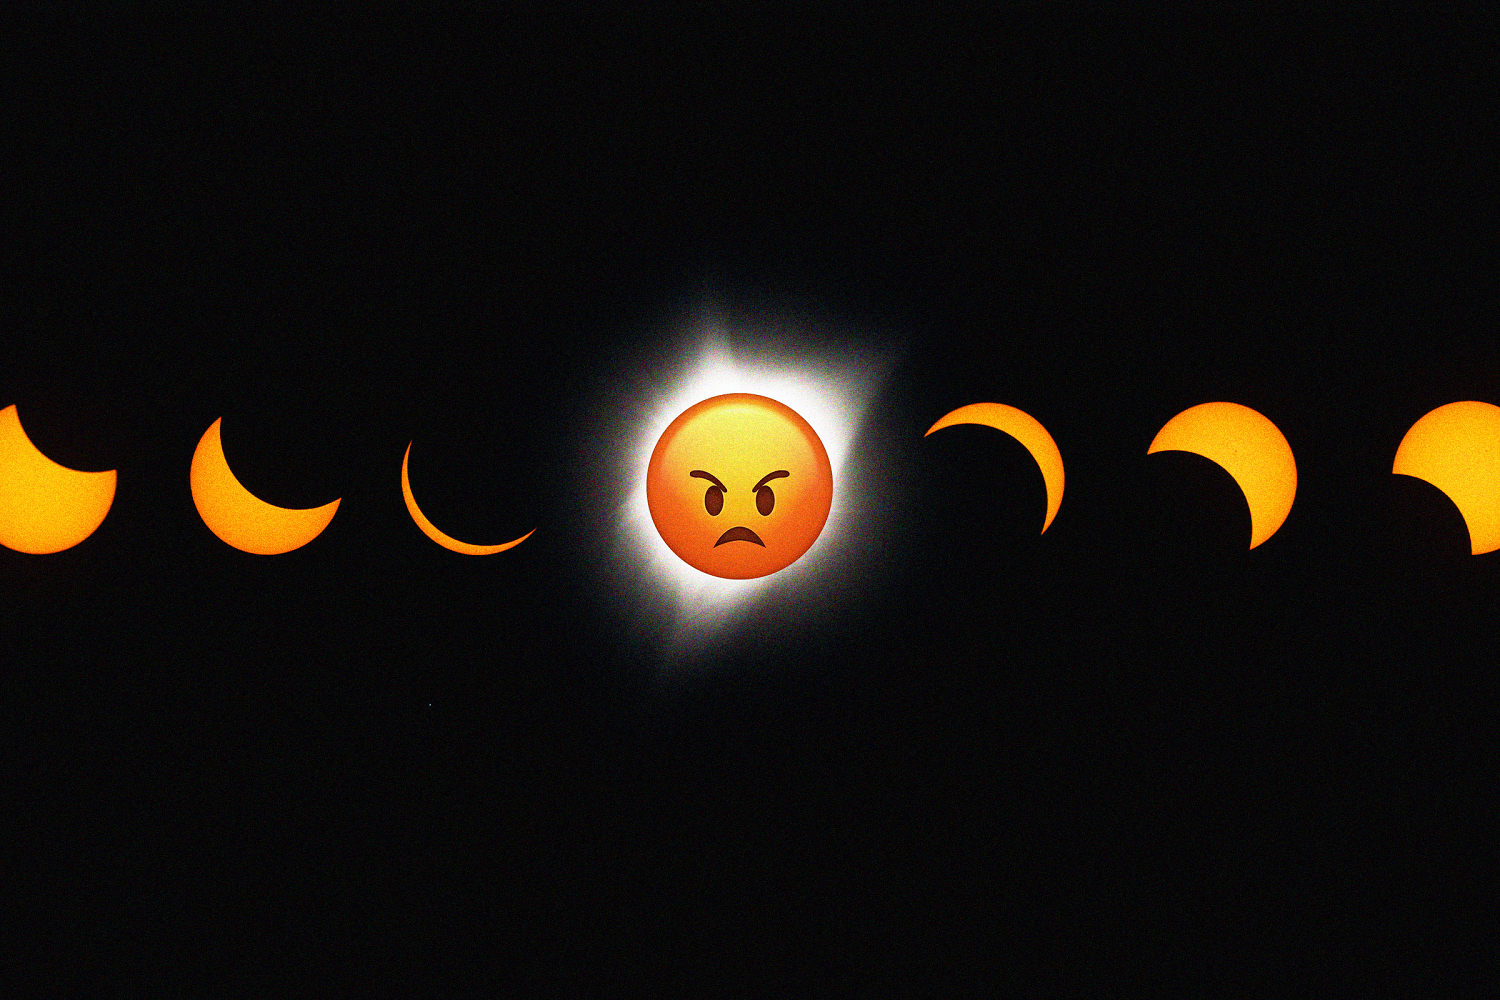 Many can’t wait for the eclipse. Some can’t wait until it’s over.